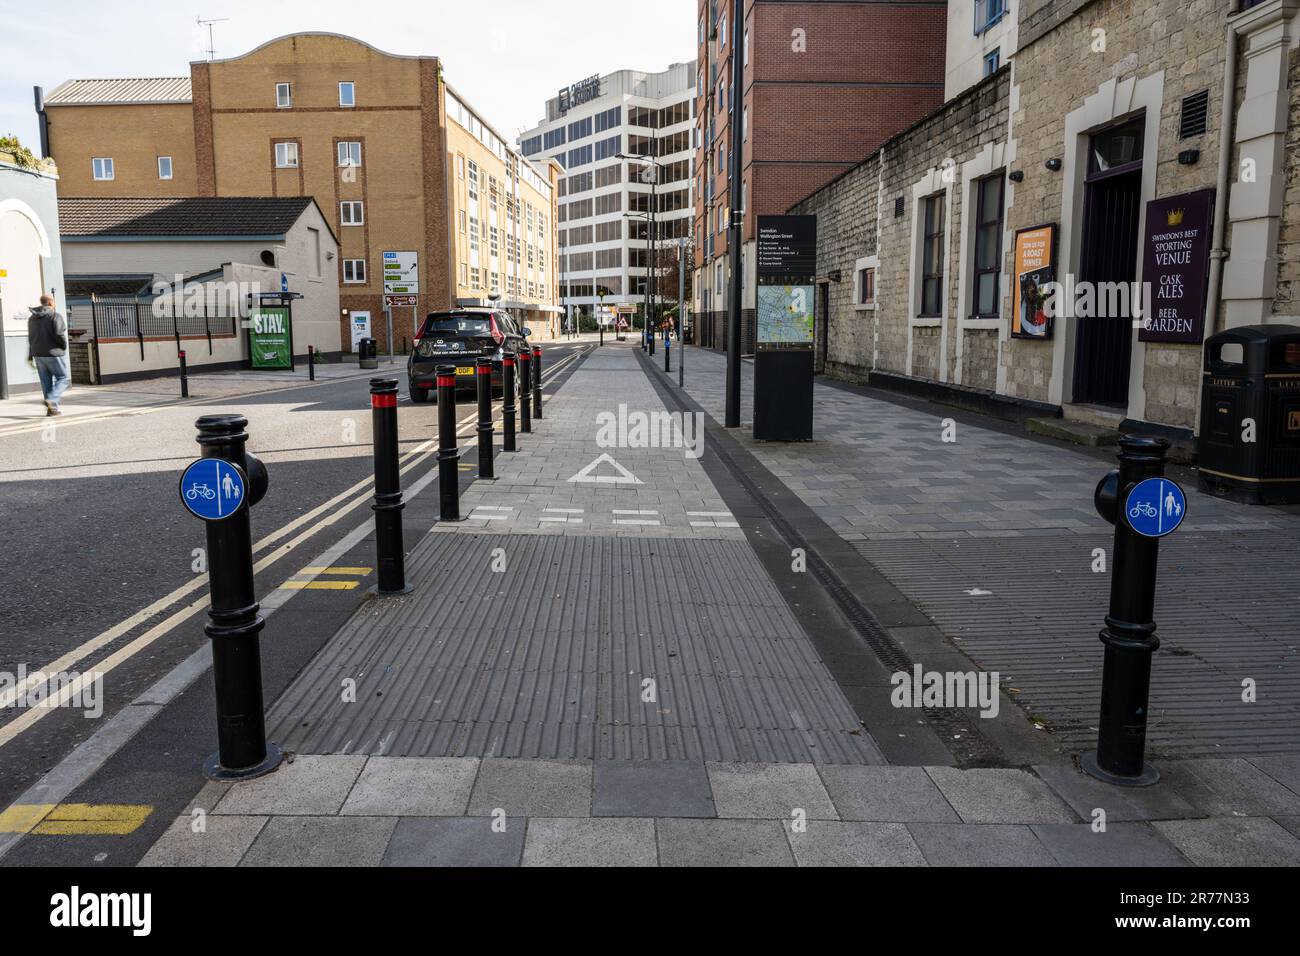 A segregated cycle lane in the town centre of Swindon in Wiltshire, England. Stock Photo